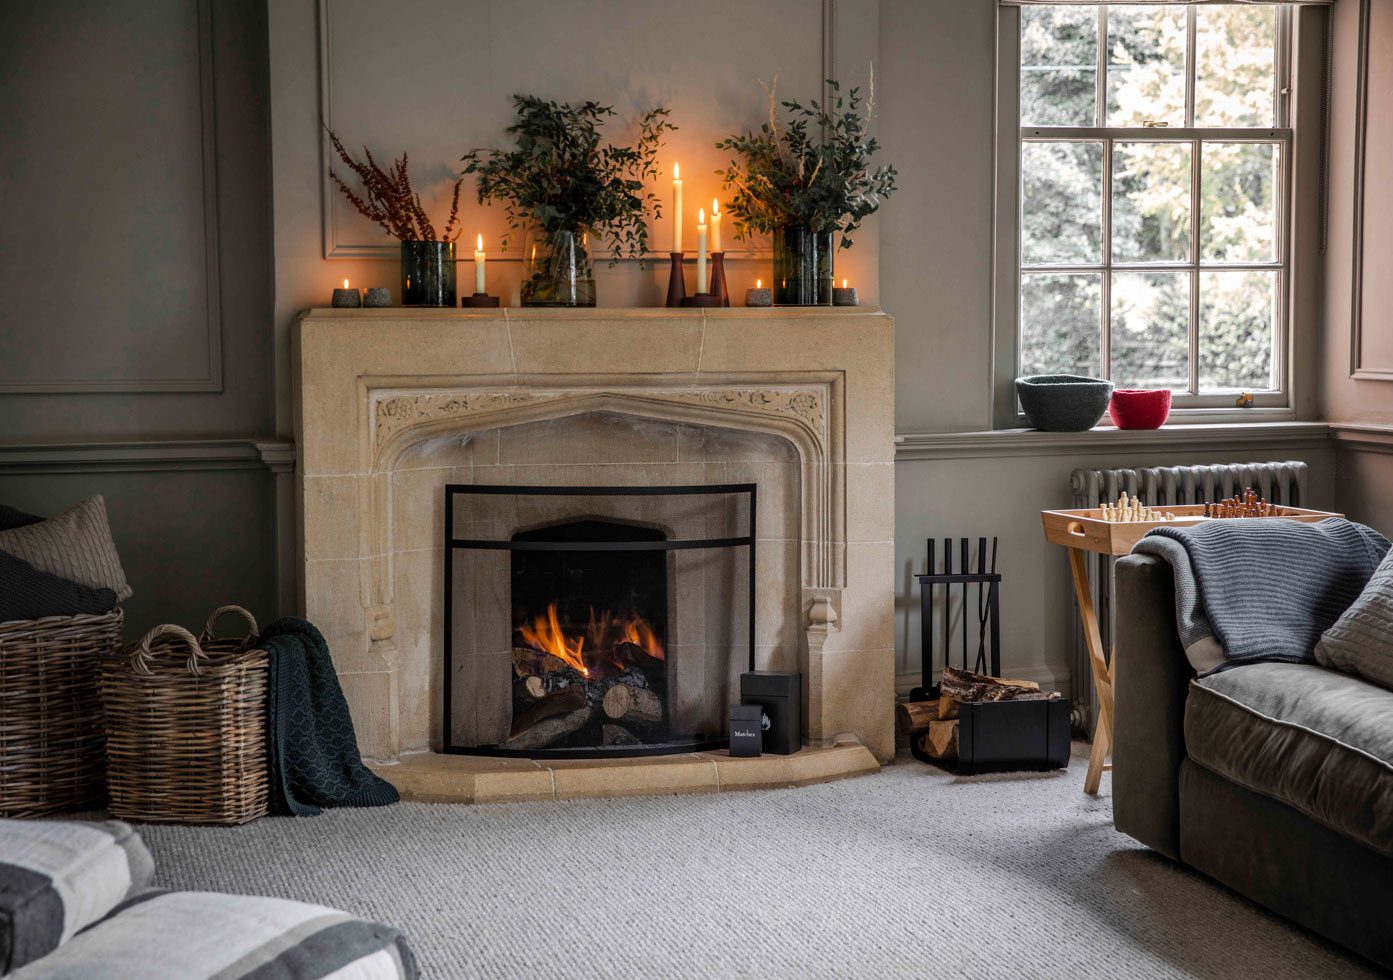 Opening Up A Fireplace Costs Regs And, Cost Of Building A Fireplace From Scratch